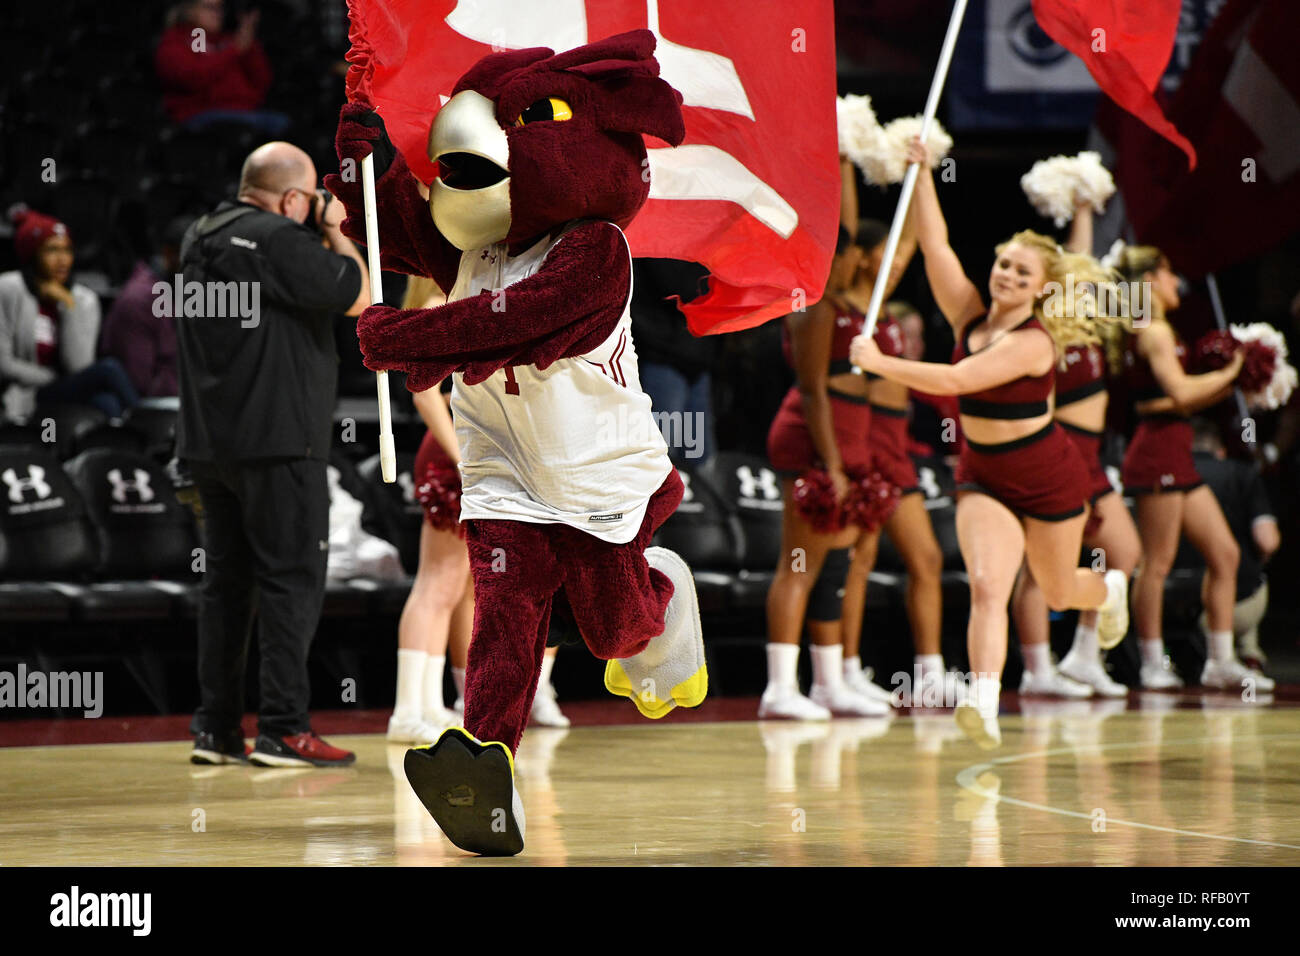 Philadelphia, Pennsylvania, USA. 24th Jan, 2019. Temple Owls mascot HOOTER leads the team onto the court prior to the American Athletic Conference basketball game played at the Liacouras Center in Philadelphia. Temple held on to beat Memphis 85-76. Credit: Ken Inness/ZUMA Wire/Alamy Live News Stock Photo